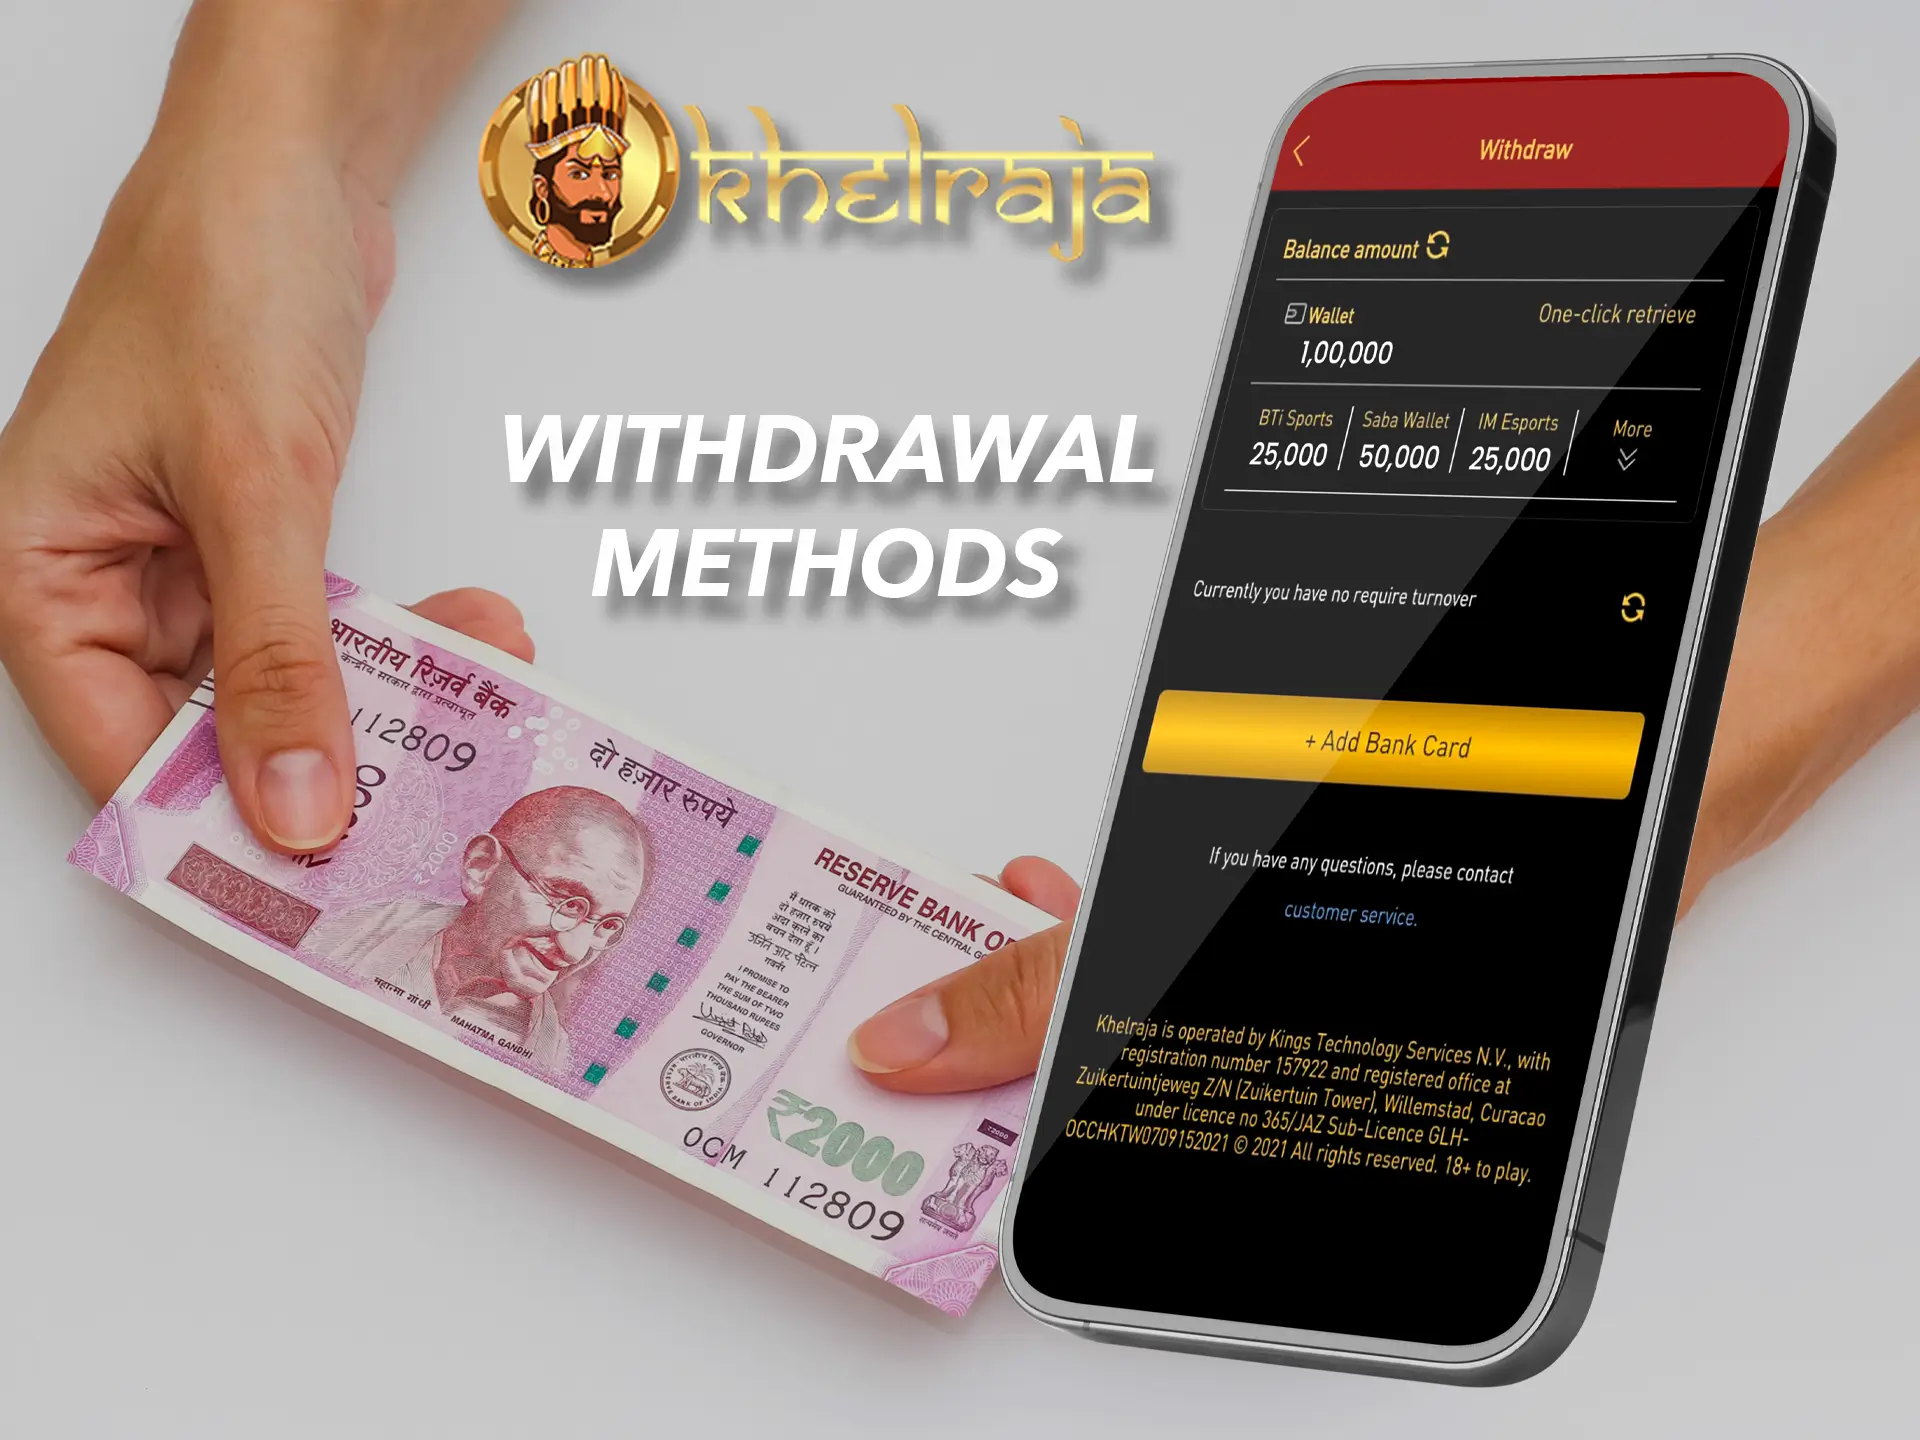 Pay attention to the withdrawal limits at Khelraja.